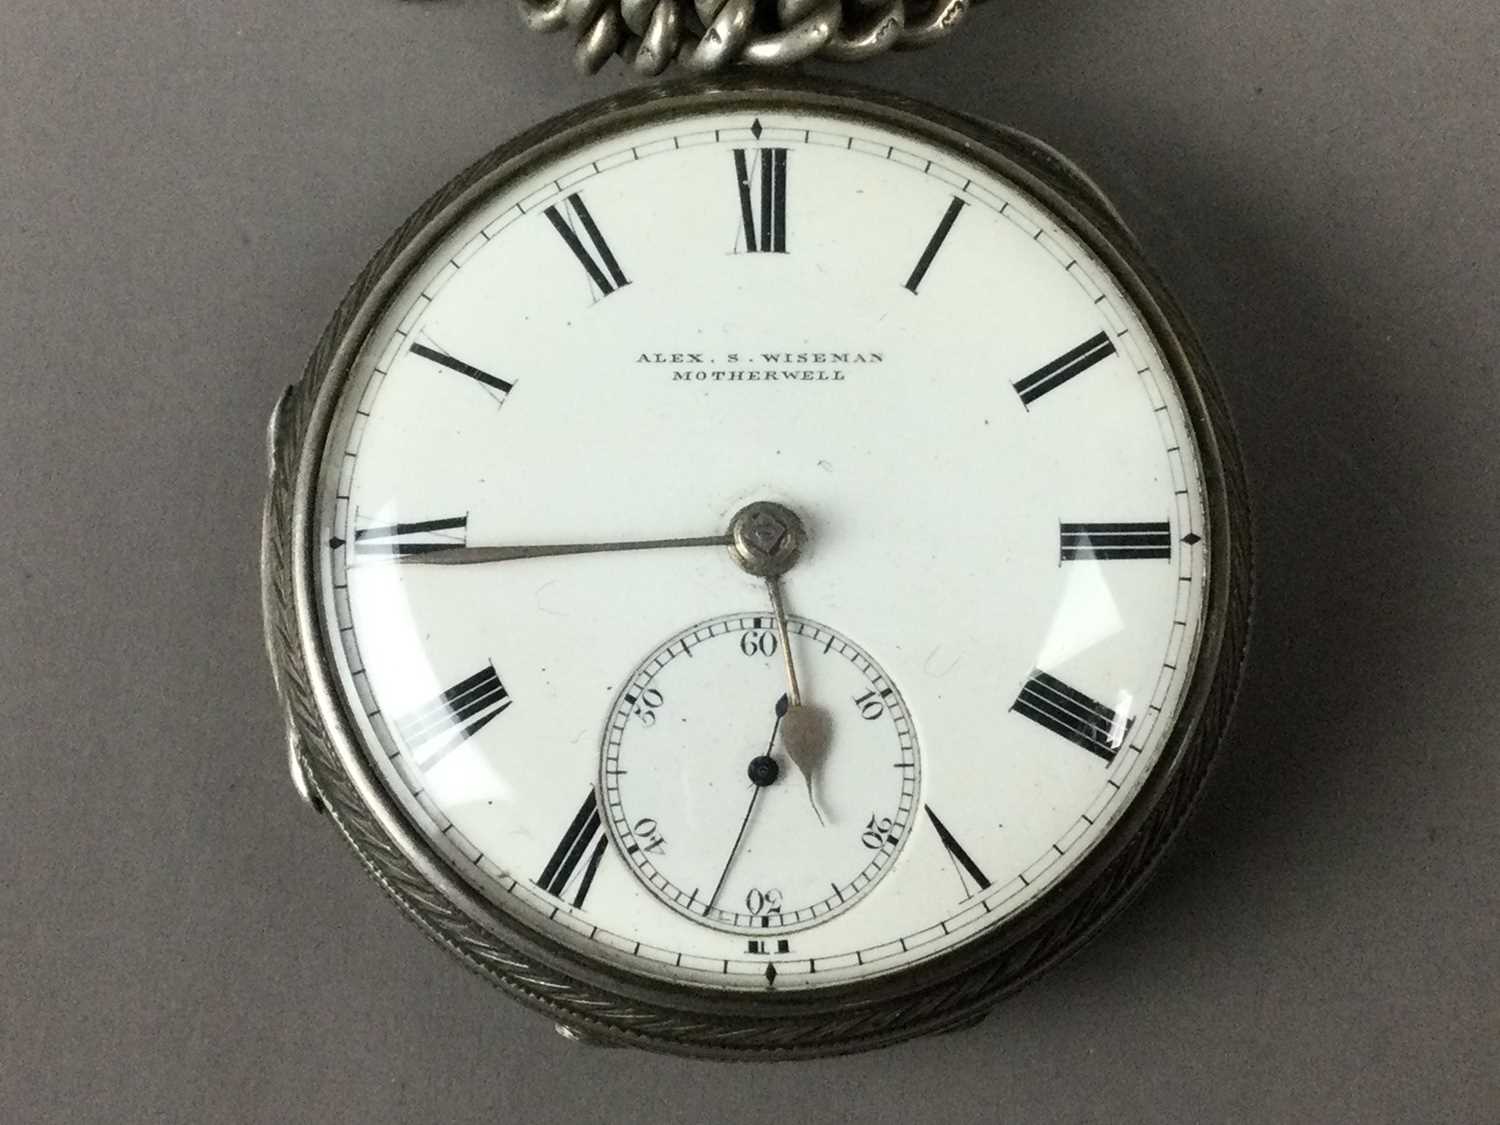 Lot 8 - A SILVER CASED POCKETWATCH AND FIVE OTHER POCKETWATCHES